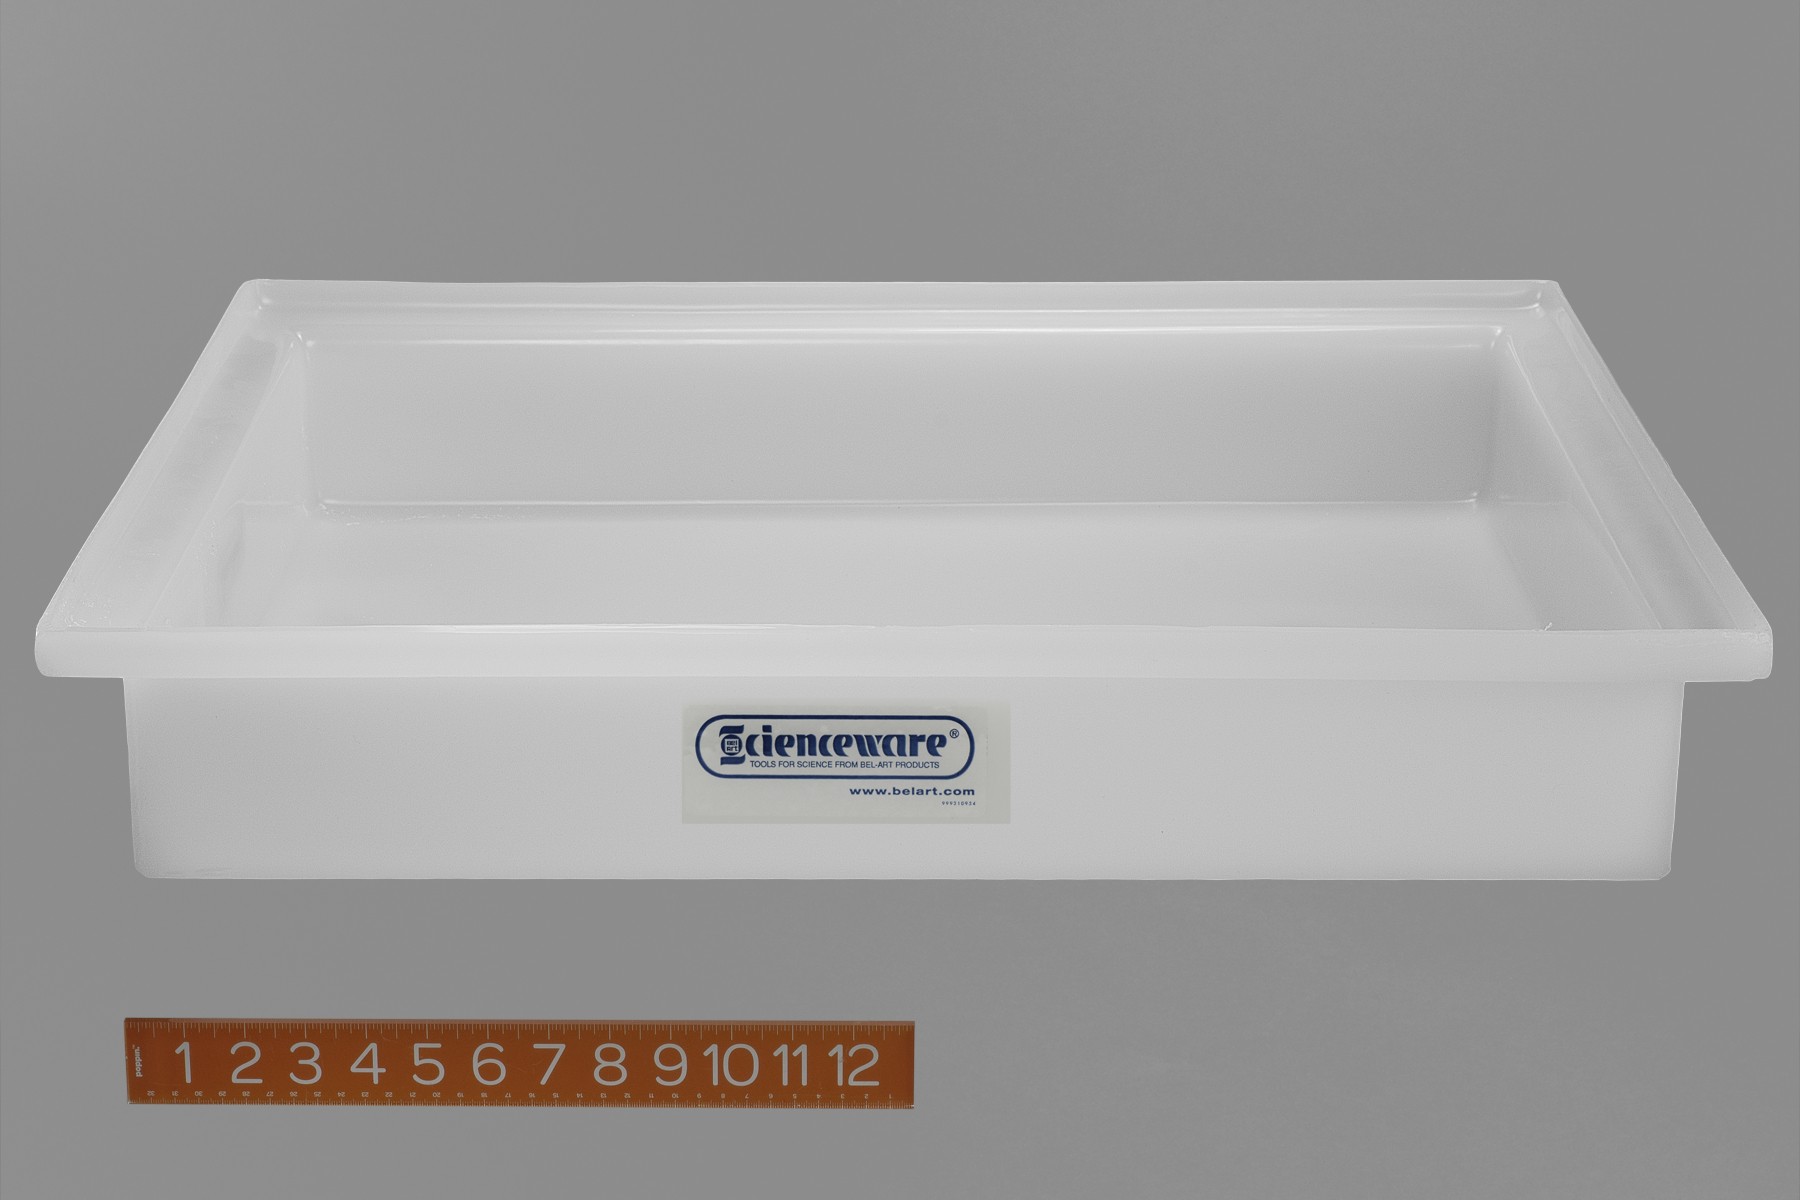 SP Bel-Art General Purpose Polyethylene Tray without Faucet; 21½ x 25½ x 4 in.